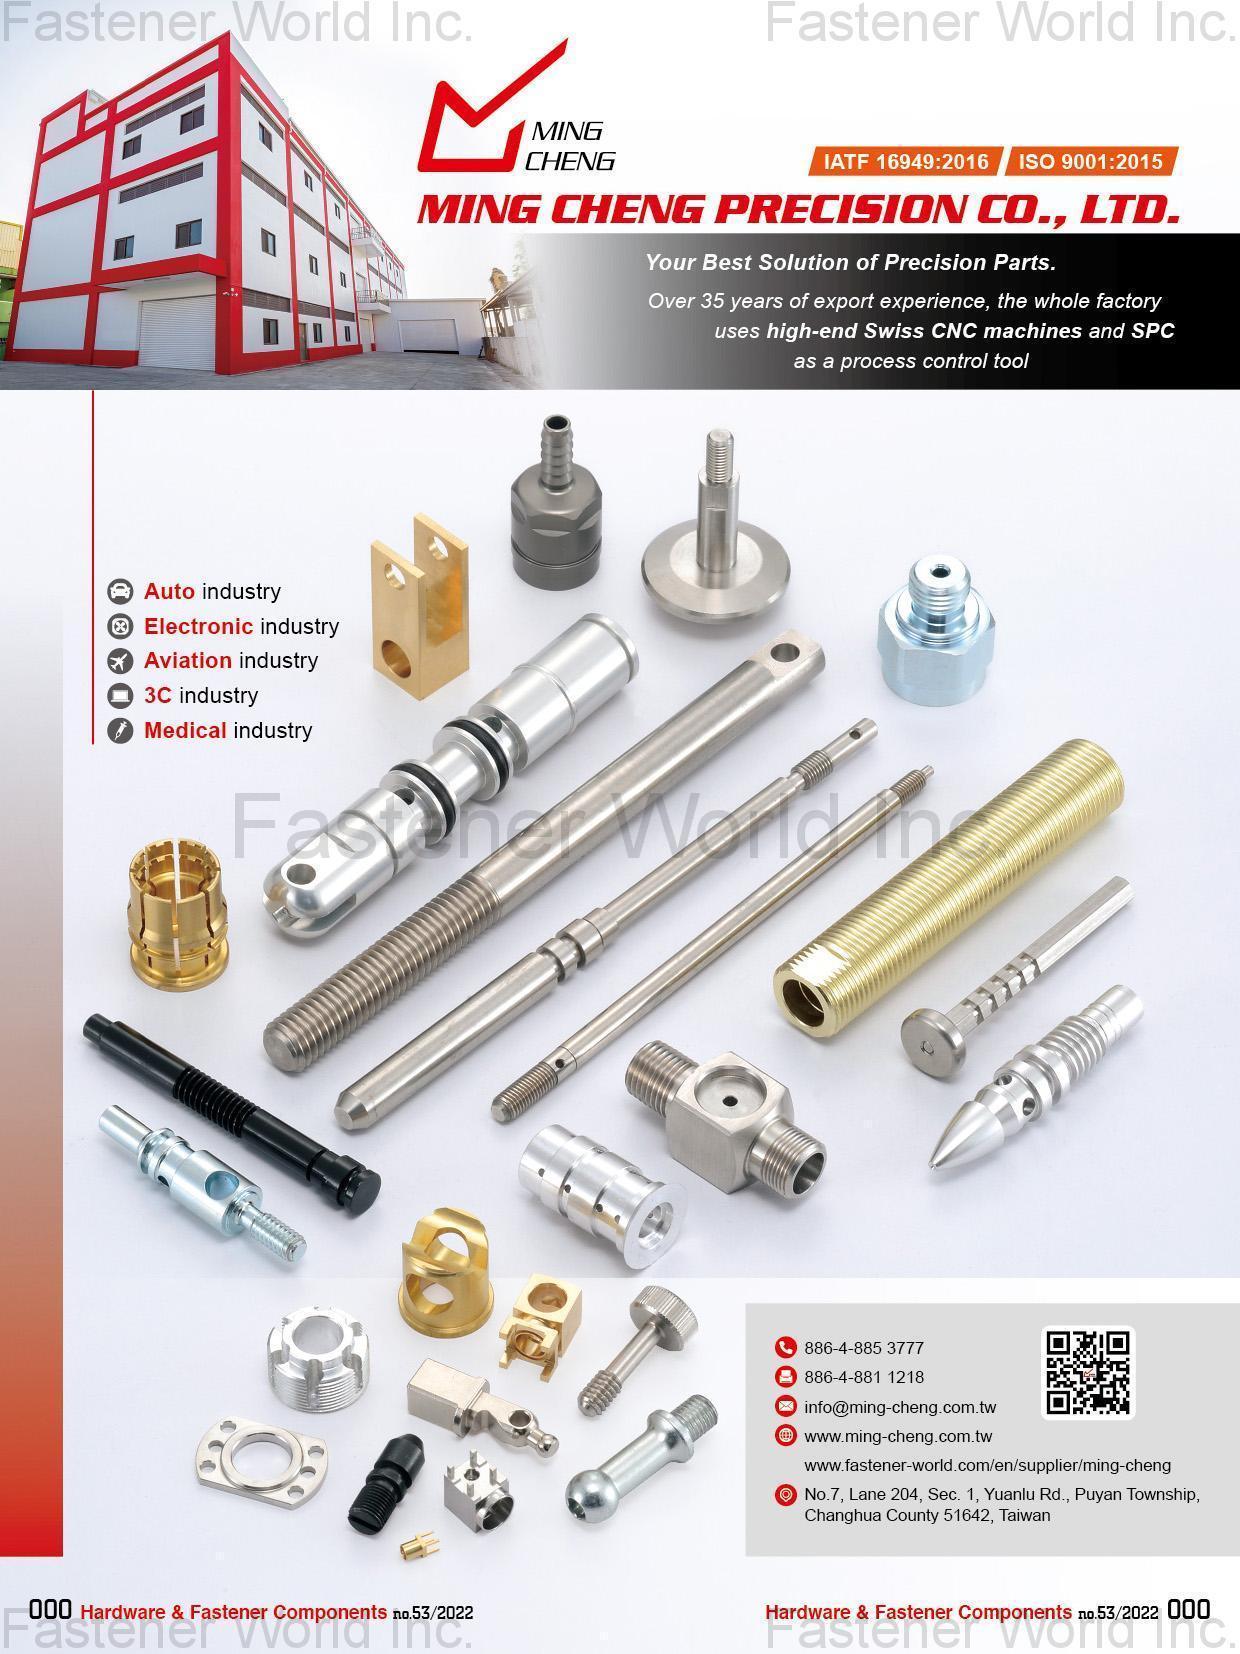 MING CHENG PRECISION CO., LTD. , Precision auto parts, Machined Components-turning parts, Precision shaft, RF and Optical Fiber Connectors, Precision Milling parts, Electronic components